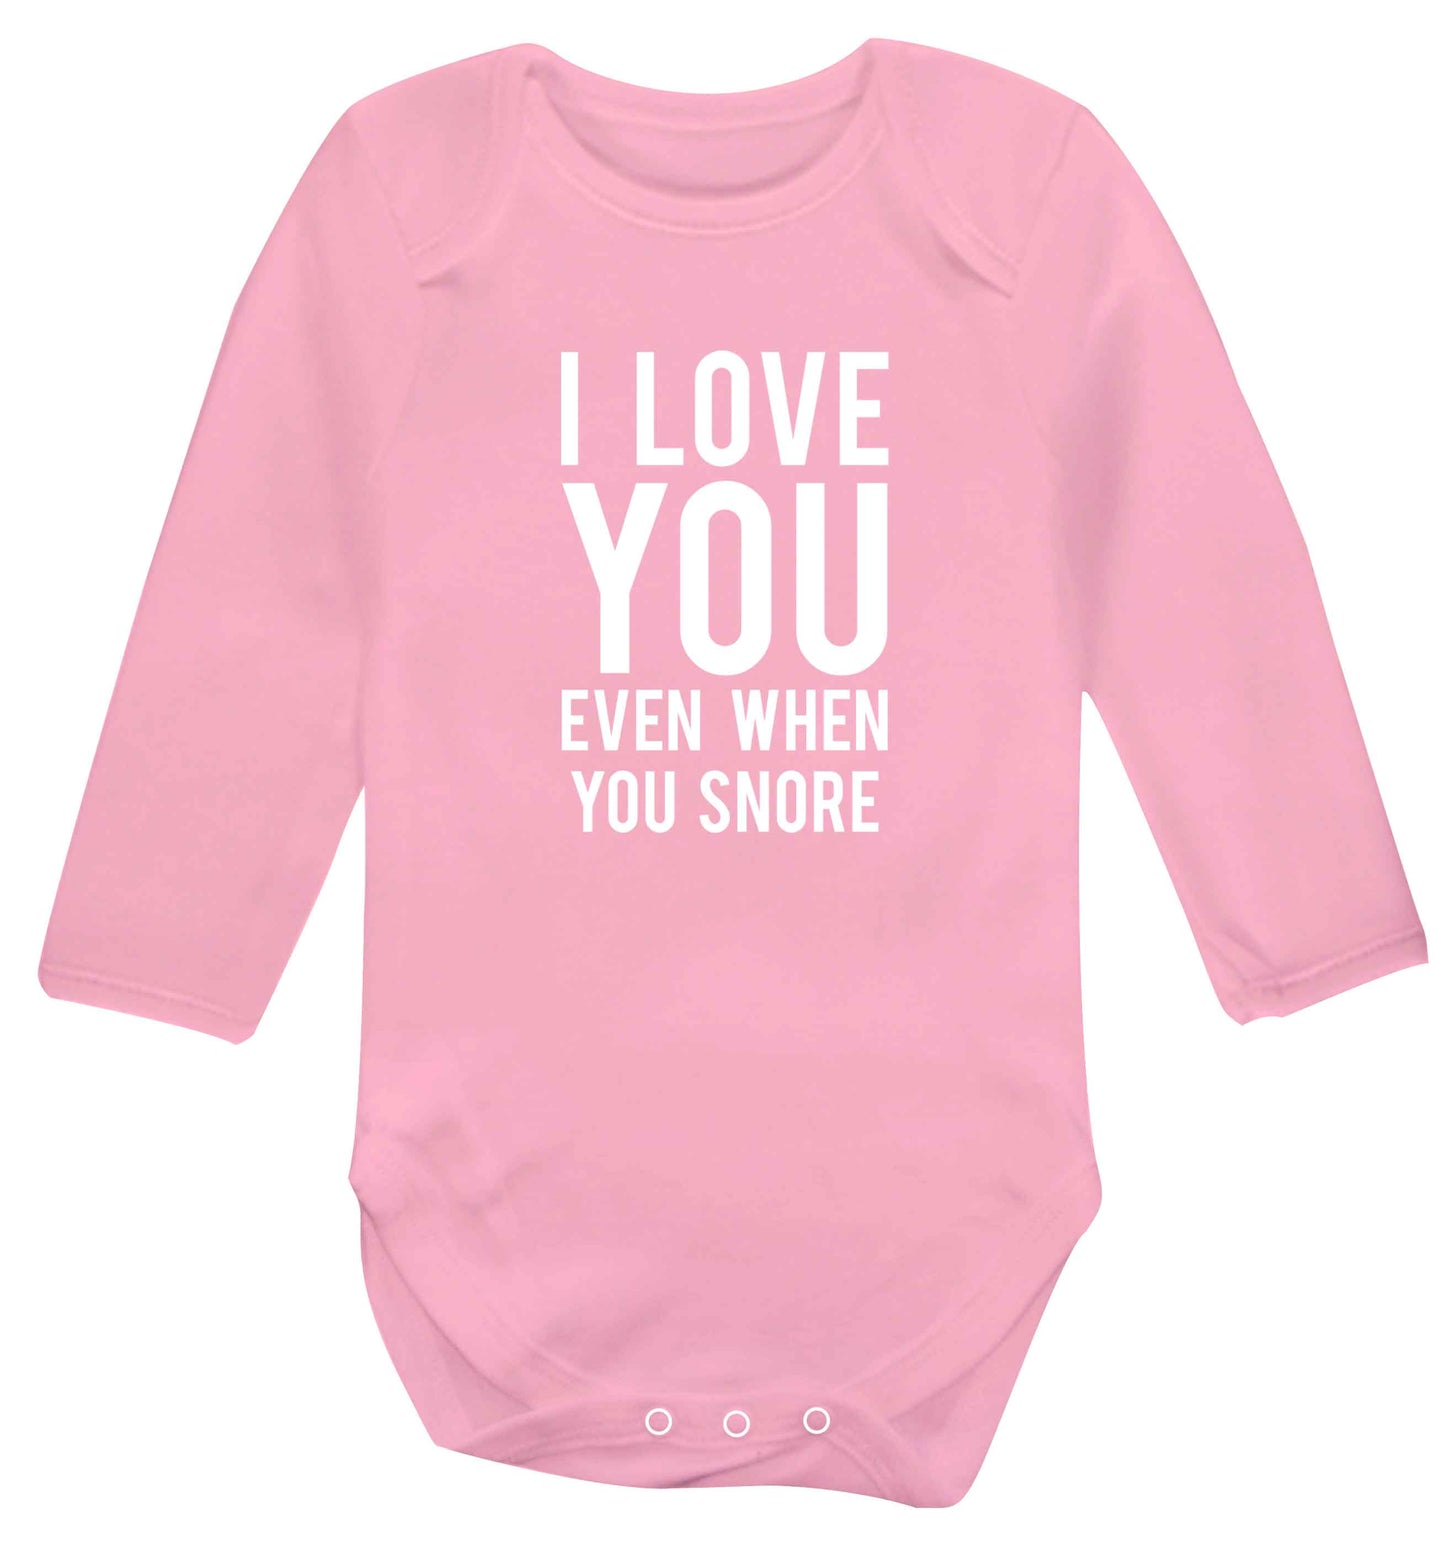 I love you even when you snore baby vest long sleeved pale pink 6-12 months